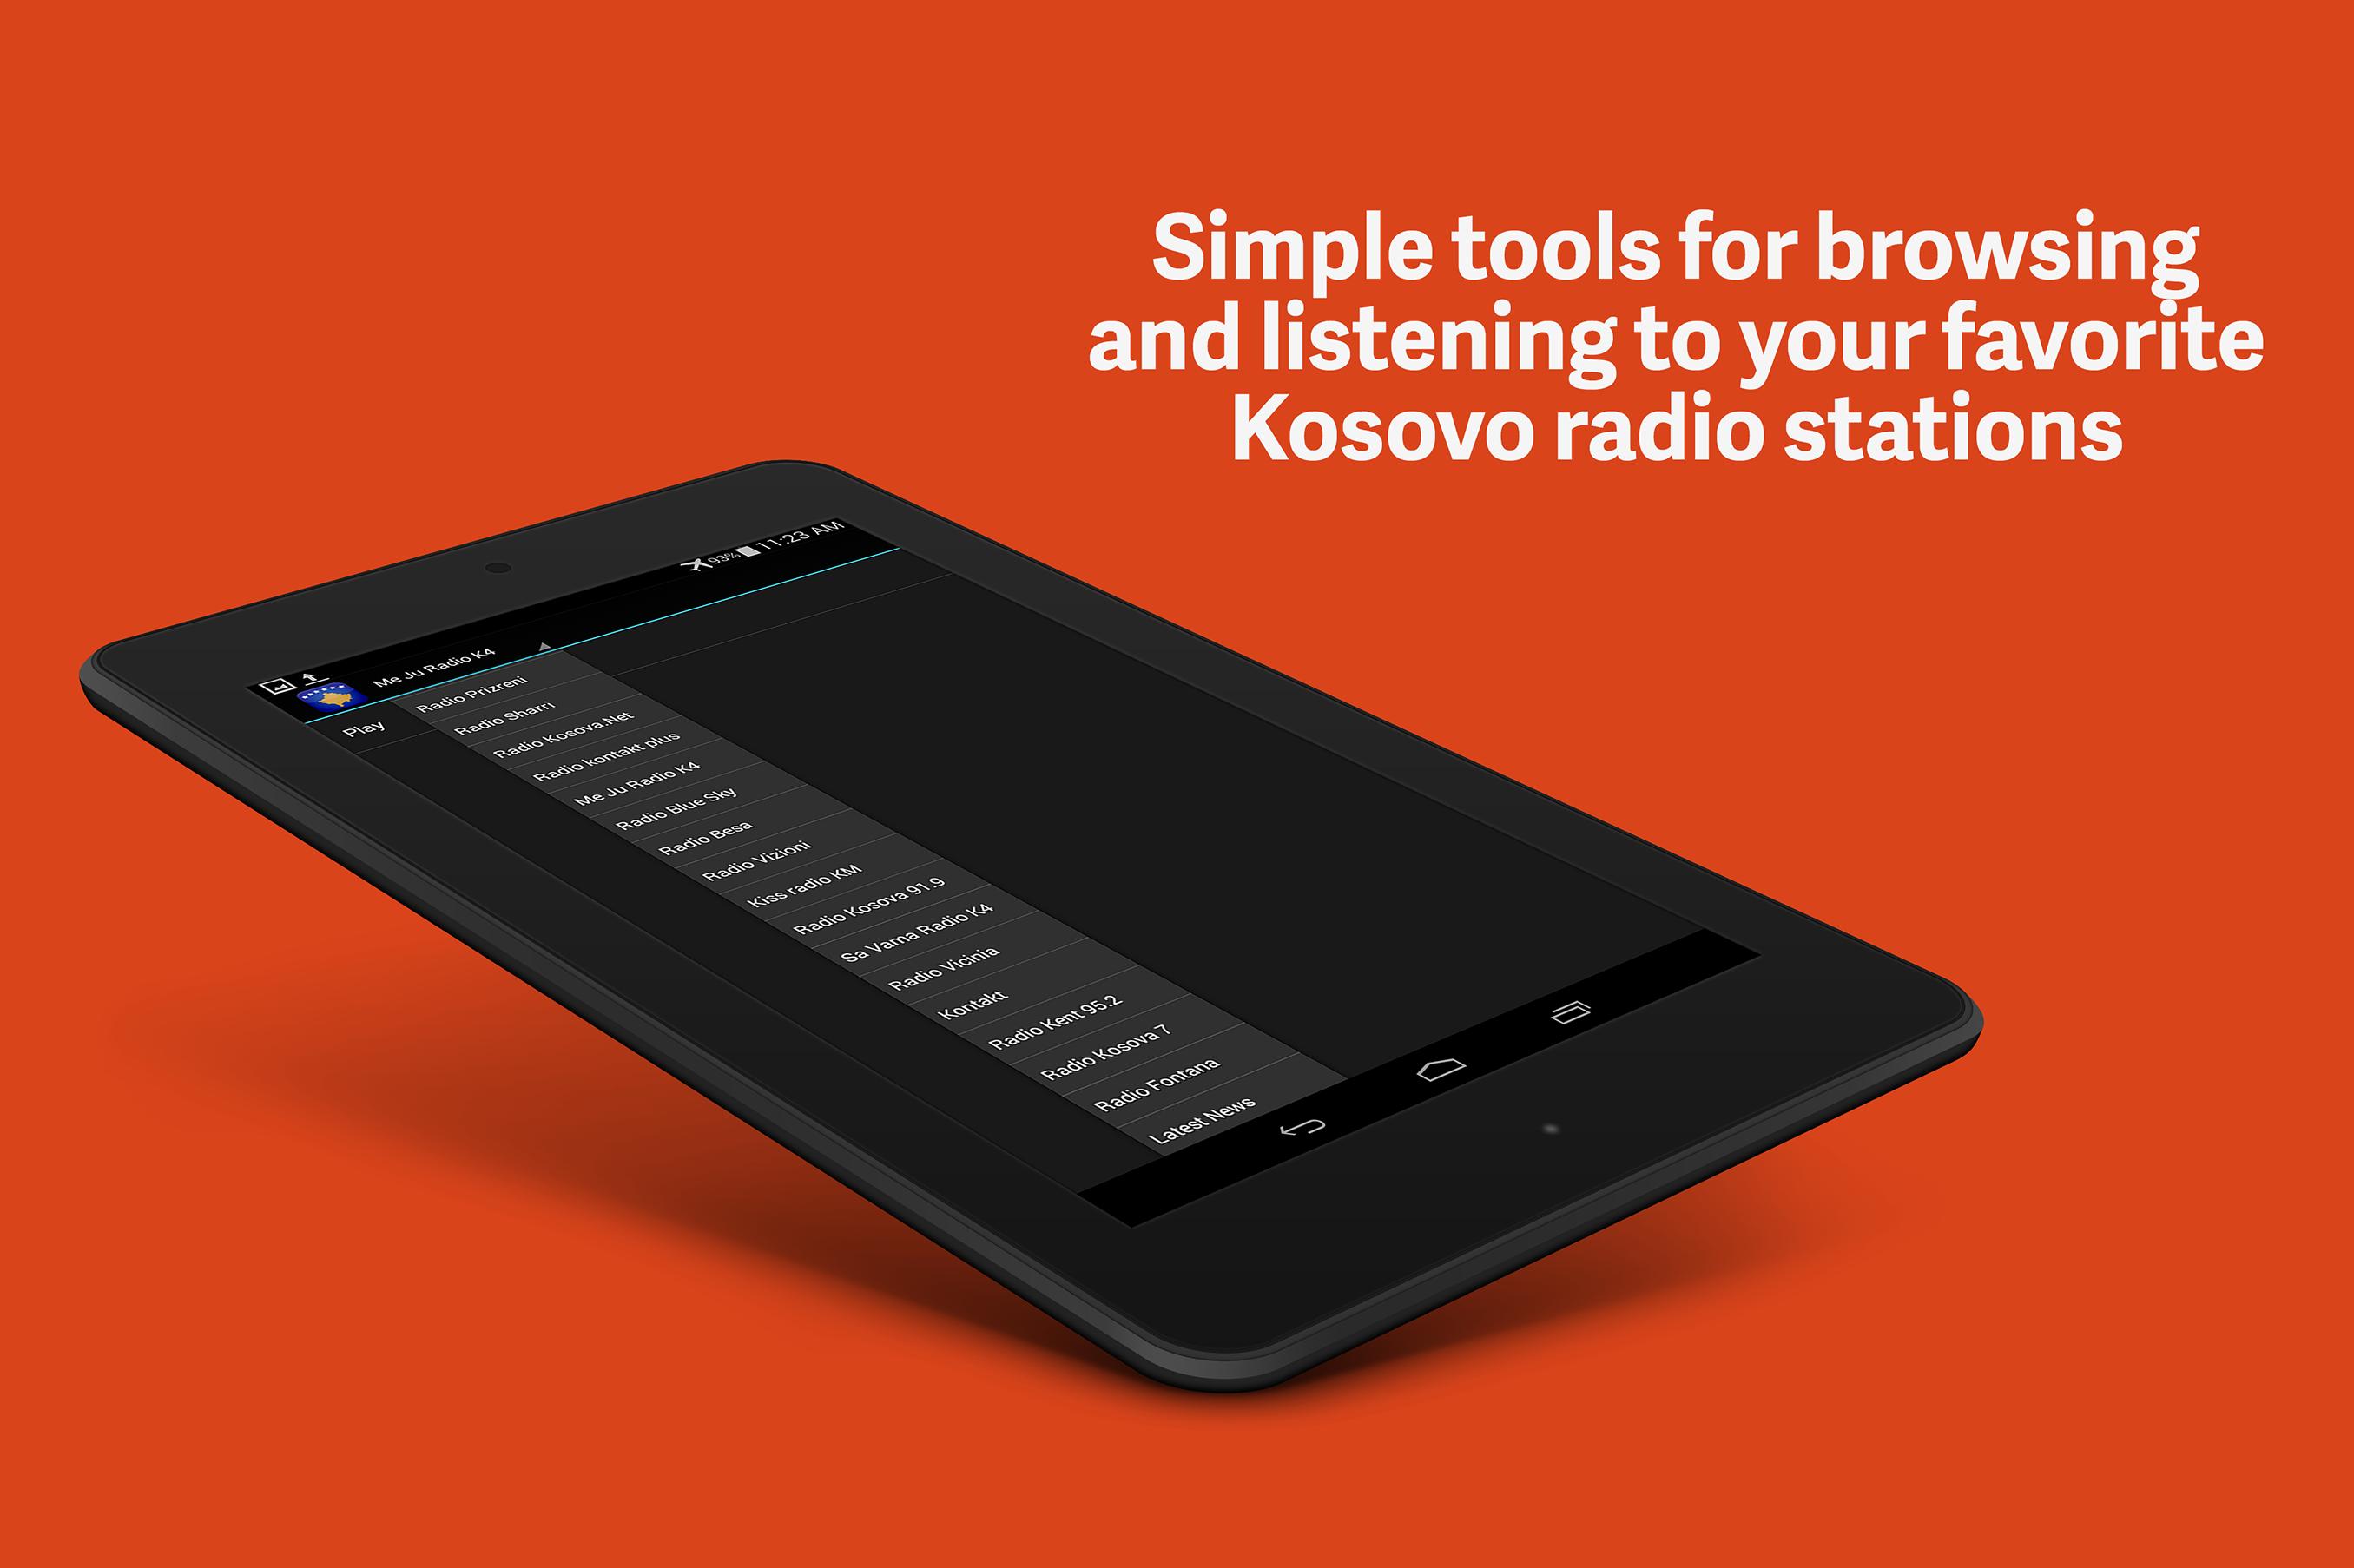 Kosovo Radios for Android - APK Download